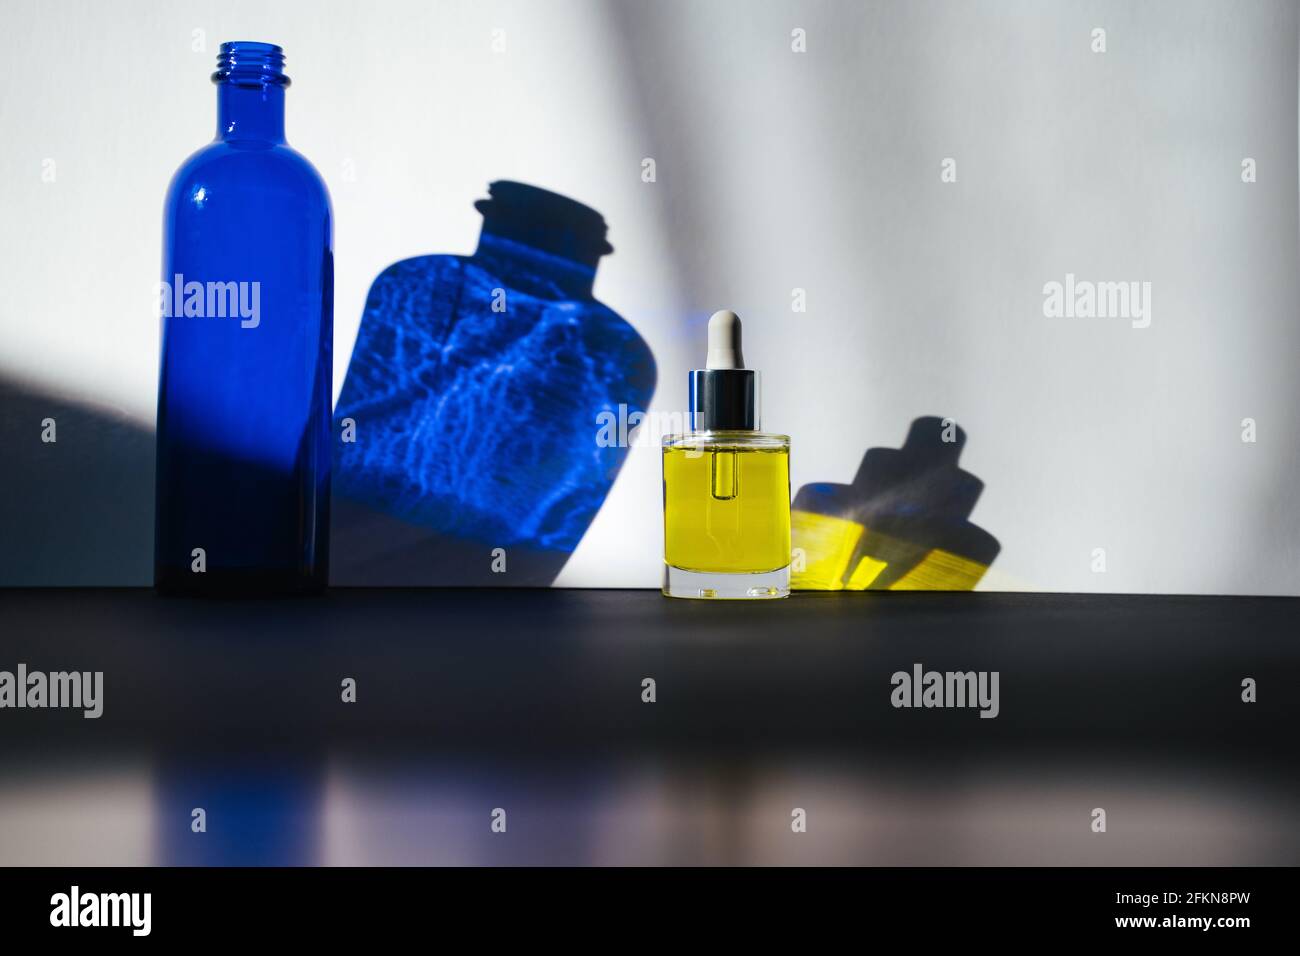 Dark blue glass bottle and face oil in front of white background. Shadows in direct sunlight. Side view Stock Photo